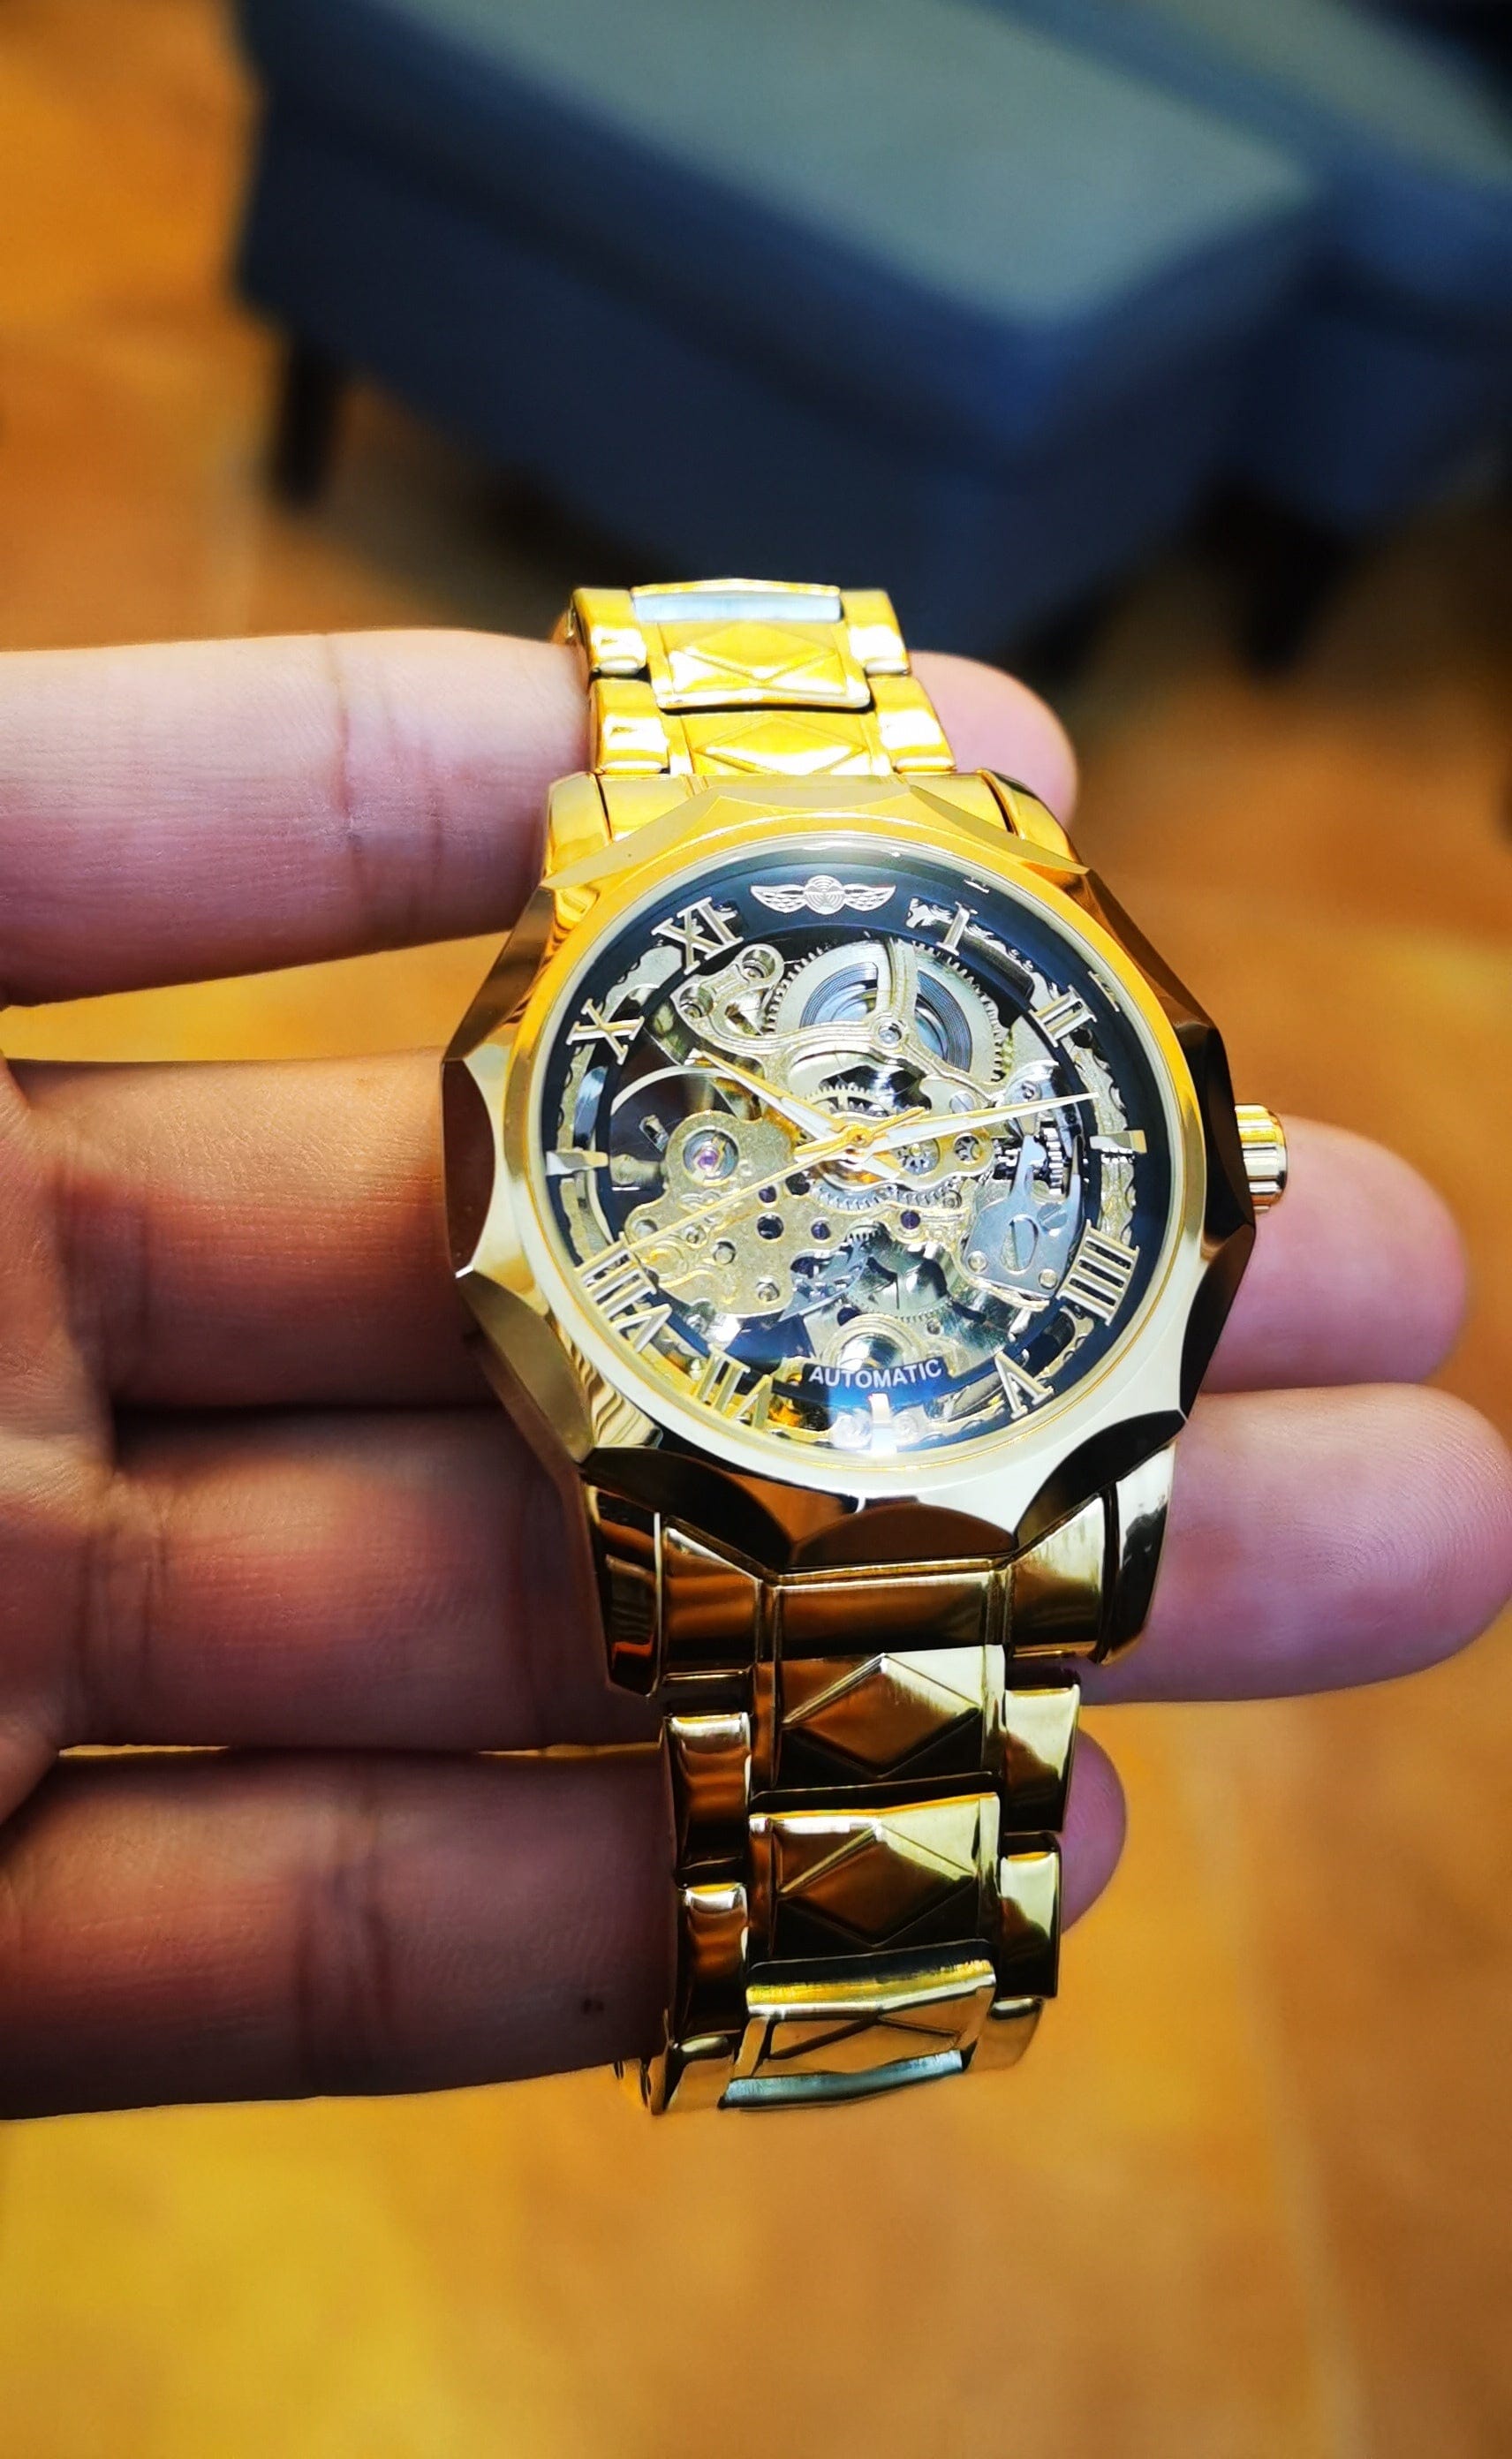 VVS Jewelry hip hop jewelry Lux Dodecagon Skeleton Automatic Mechanical Watch